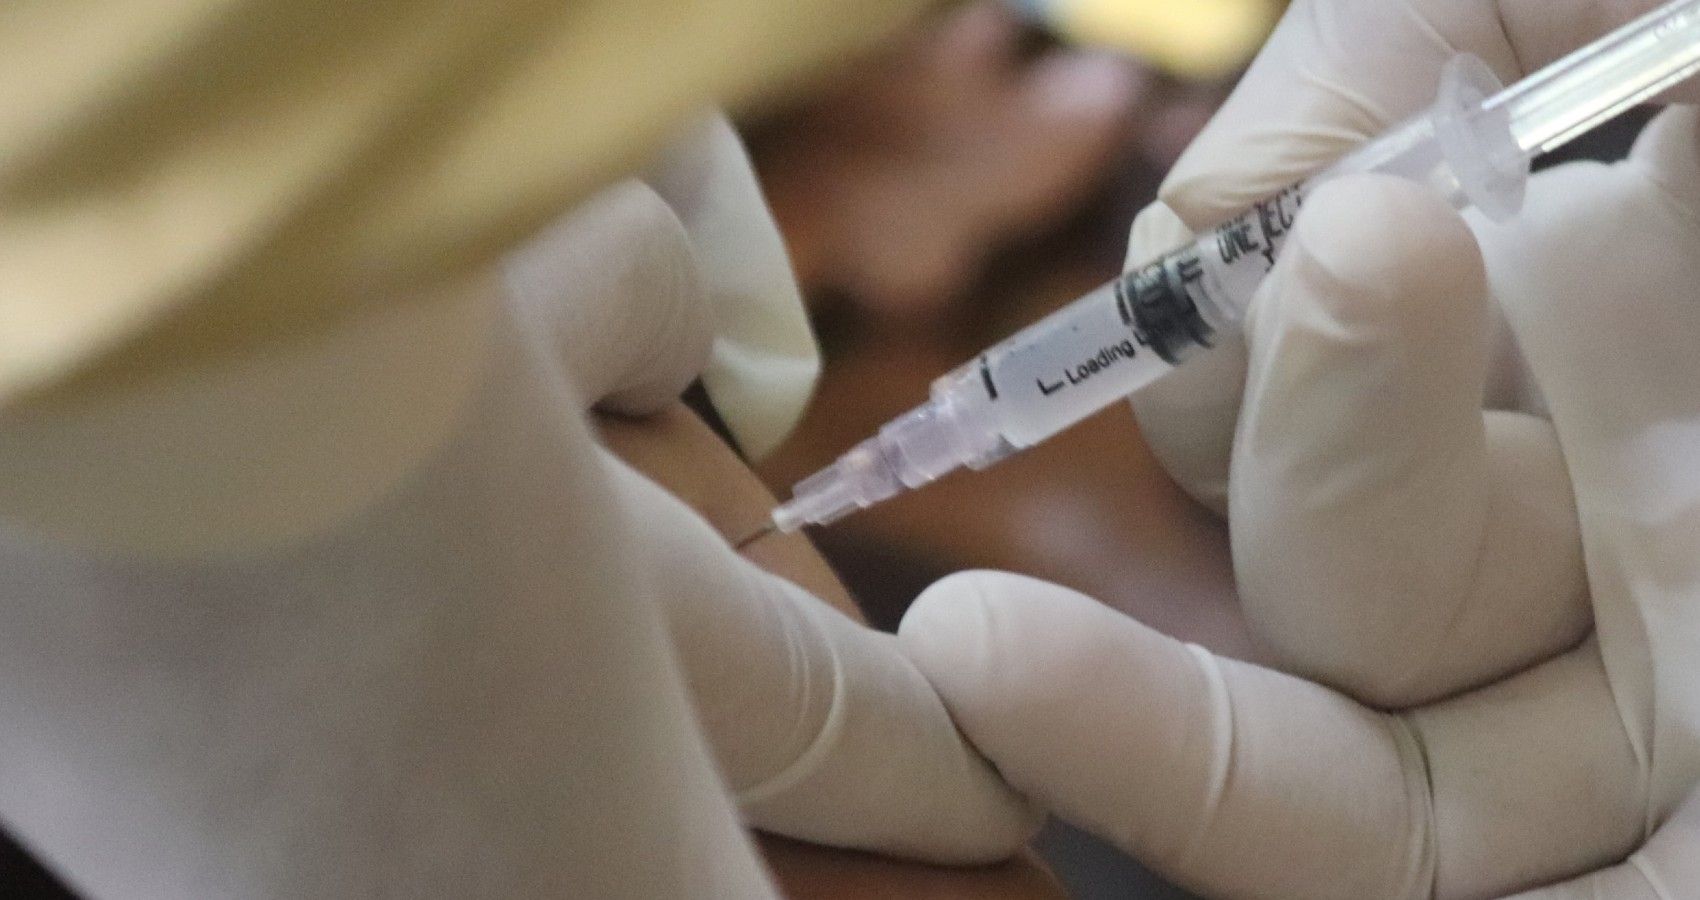 Less Than Half Of Parents Plan To Give Youngest Children COVID-19 Vaccine